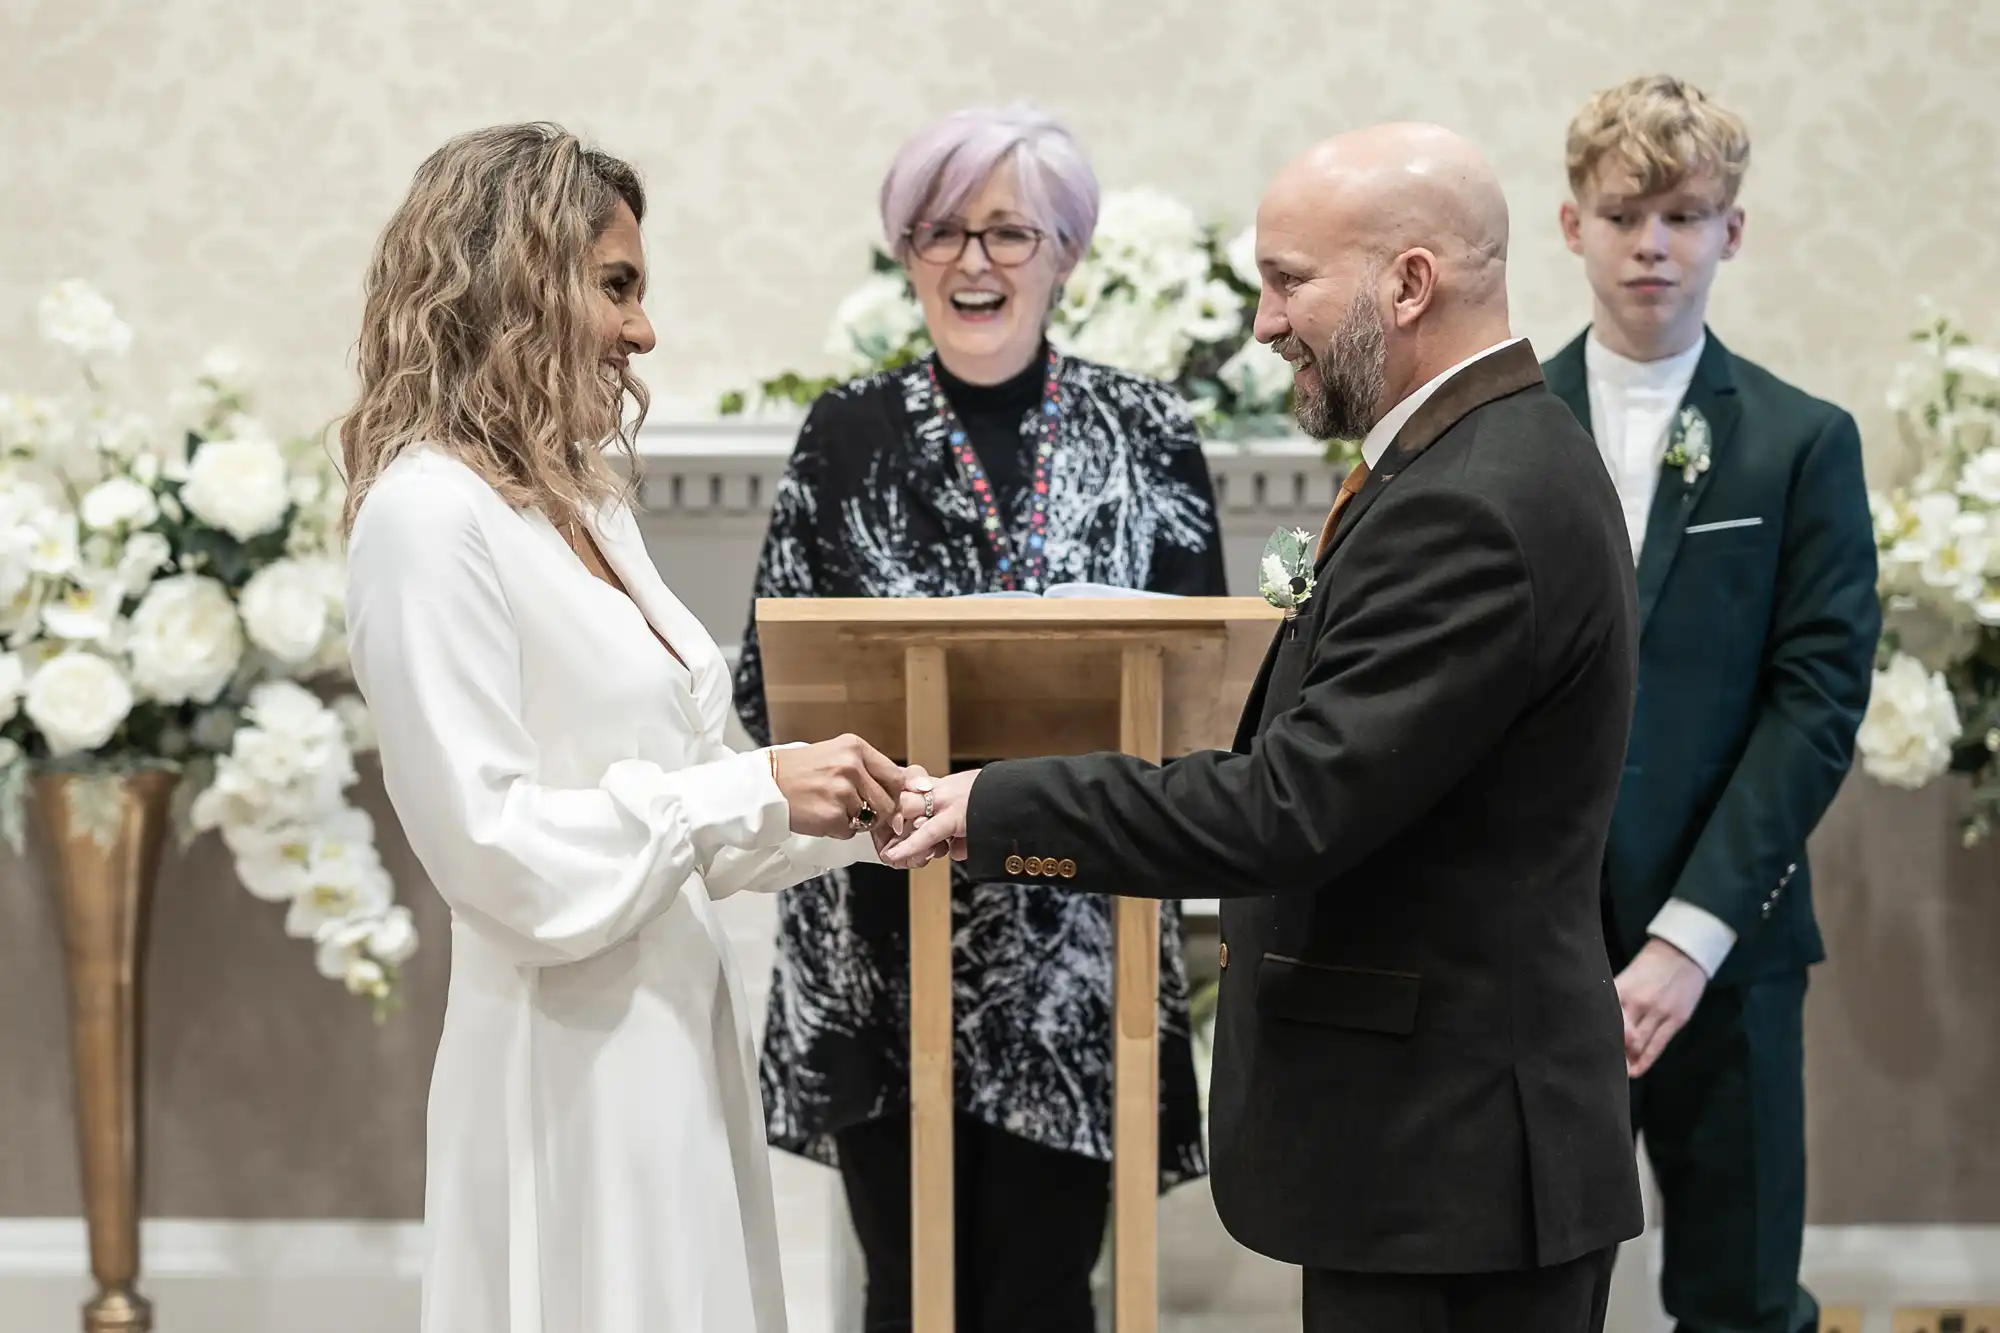 A couple exchanges rings during a wedding ceremony. A woman in a floral dress officiates, and a teenage boy in a suit stands behind them. White floral arrangements decorate the background.